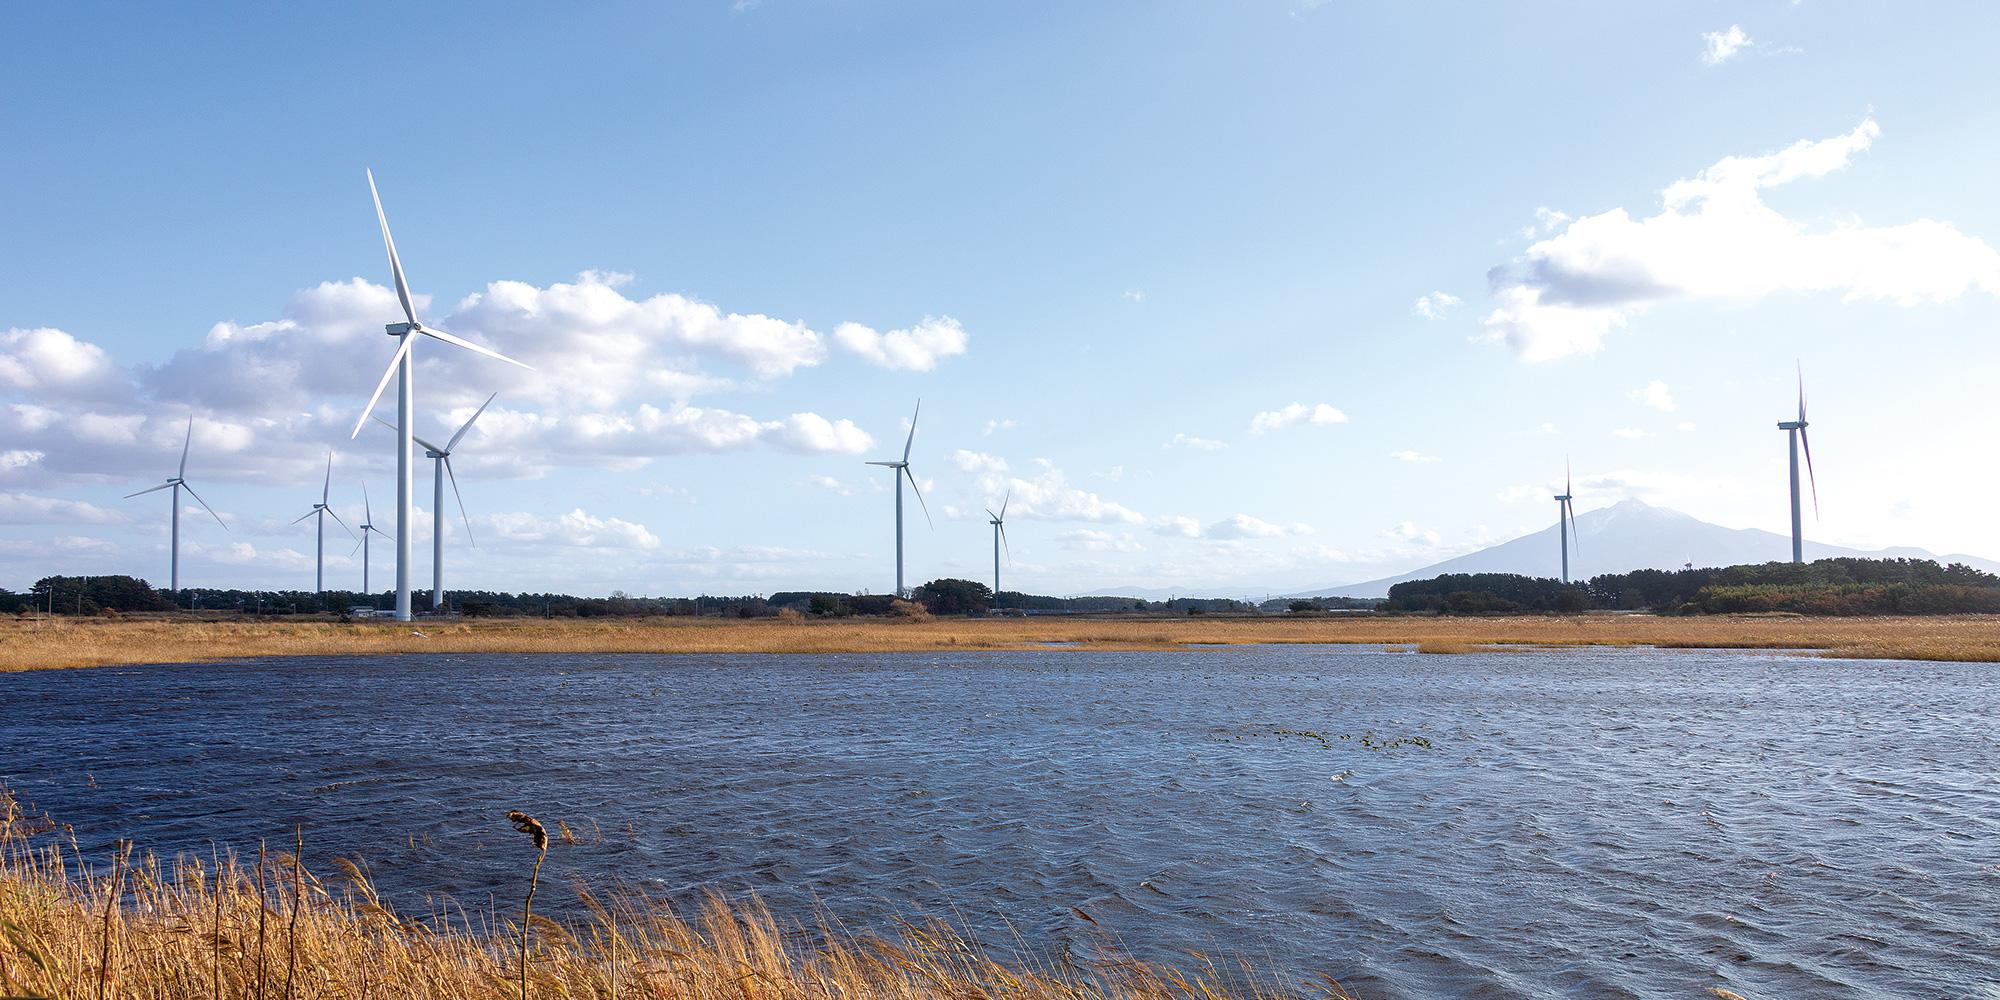 Japan’s Potential Enhanced by Renewable Energy